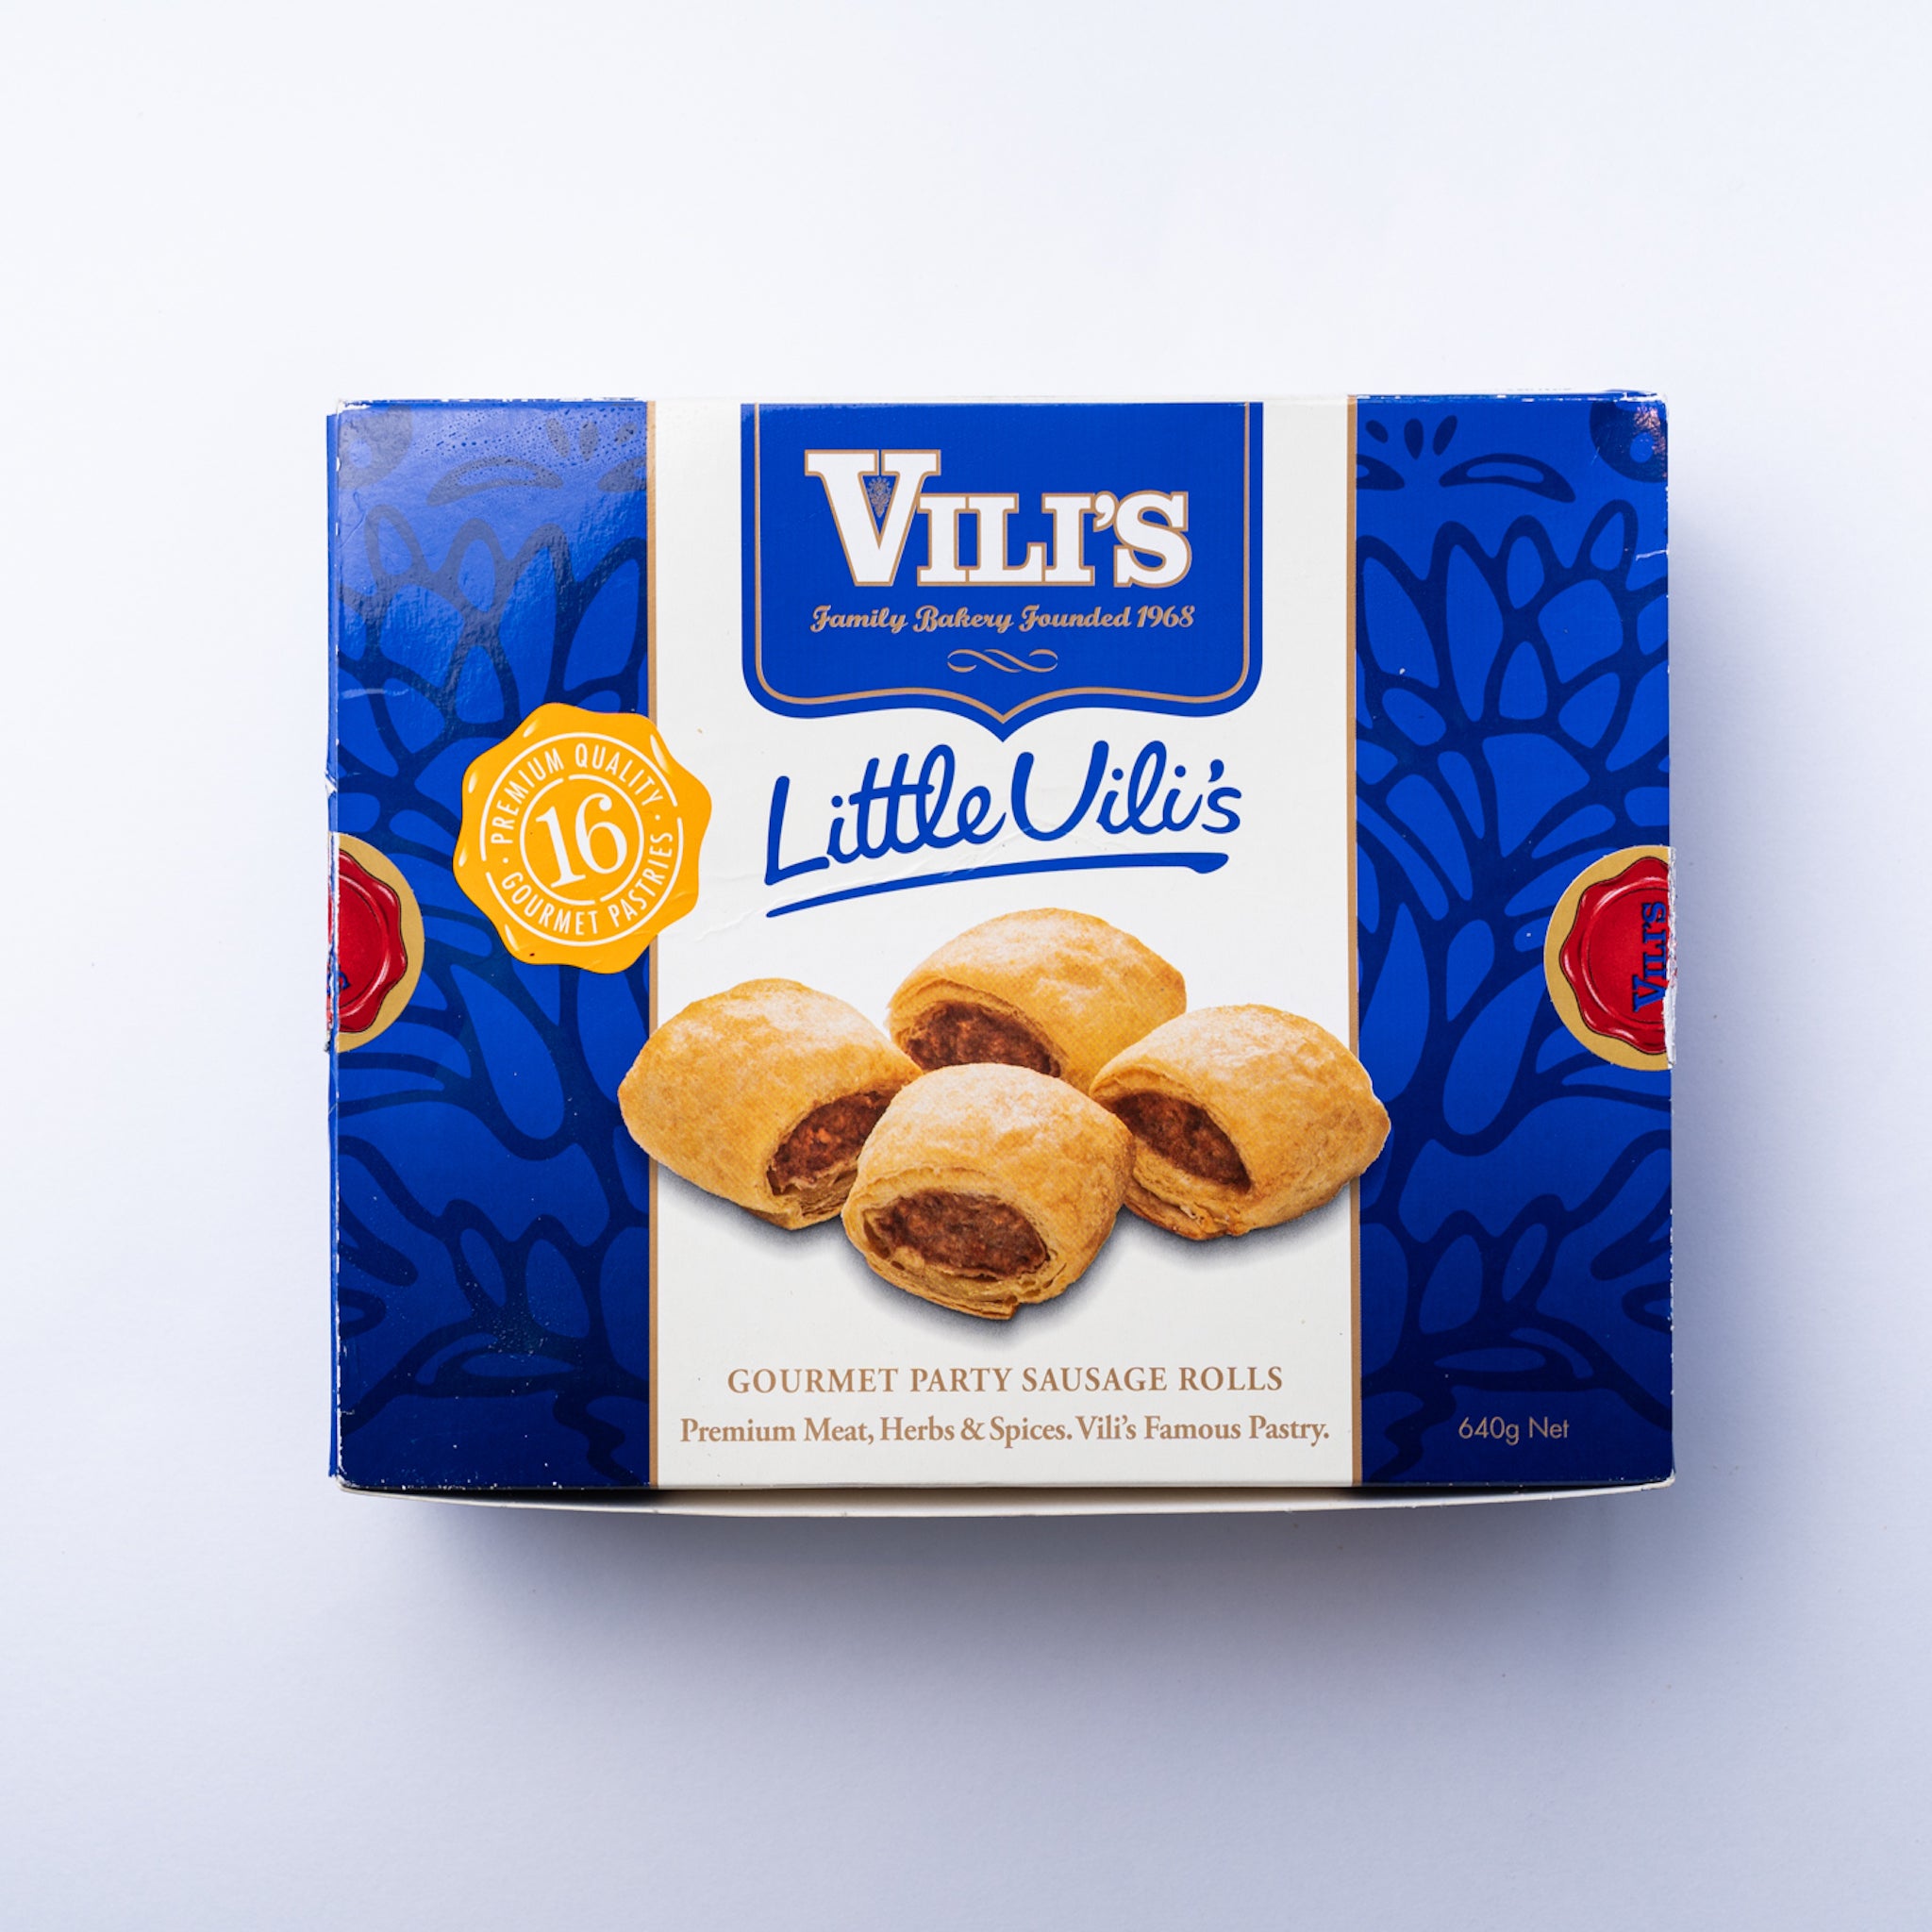 A box of Little Vili's Gourmet Party Sausage Rolls.